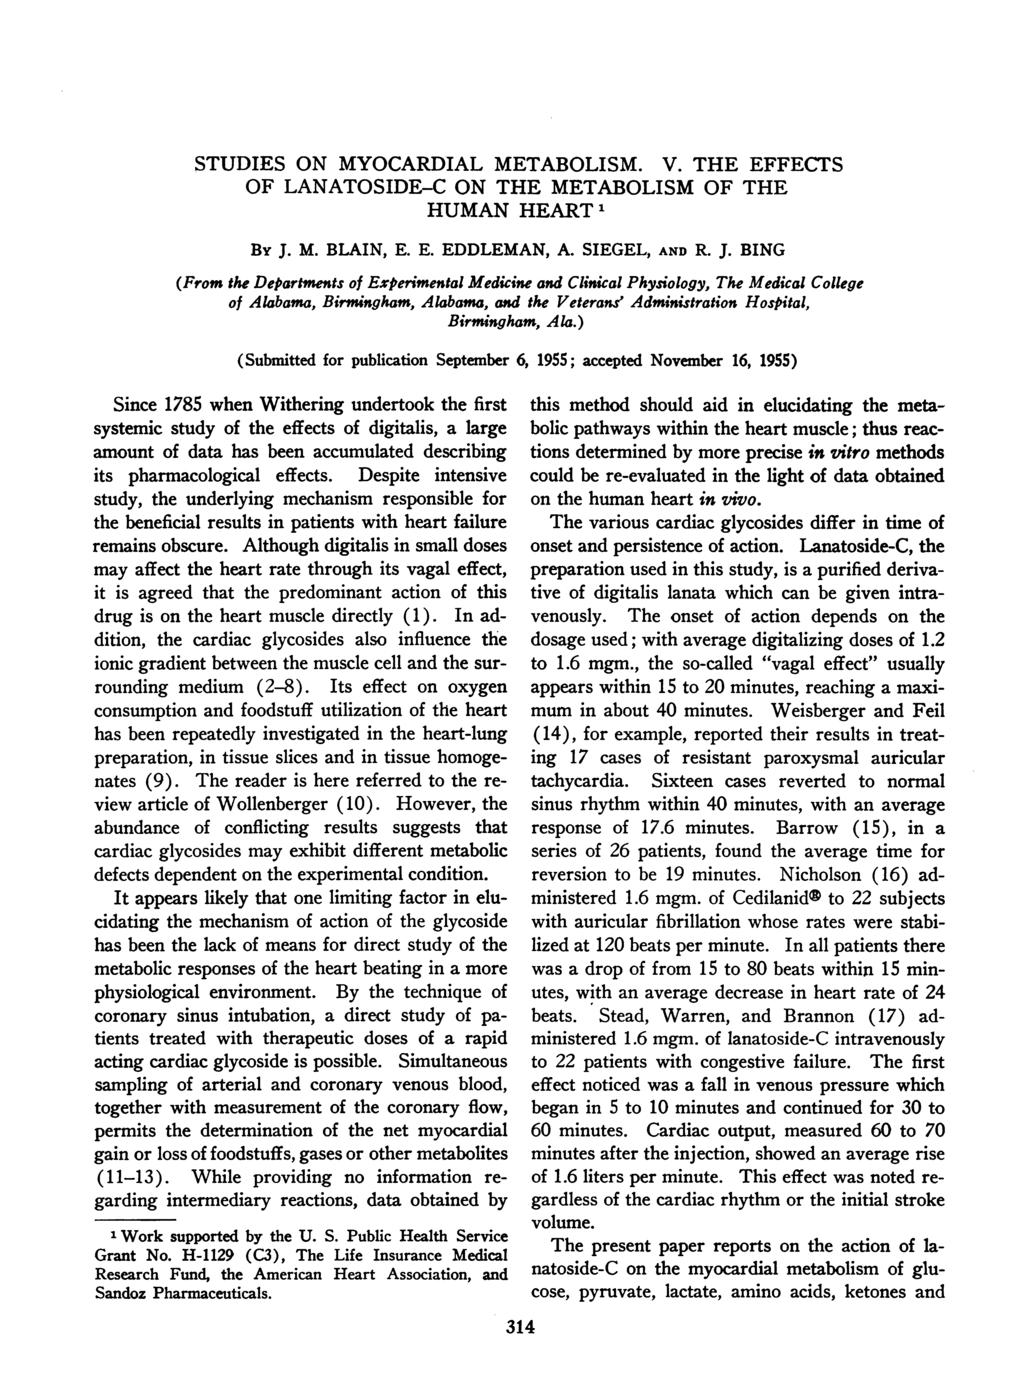 STUDES ON MYOCRDL METBOLSM V THE EFFECTS OF LNTOSDE-C ON THE METBOLSM OF THE HUMN HERT 1 By J M BLN, E E EDDLEMN, SEGEL, ND R J BNG (Frm the Departments f Experimental Medicine and Clinical Physilgy,